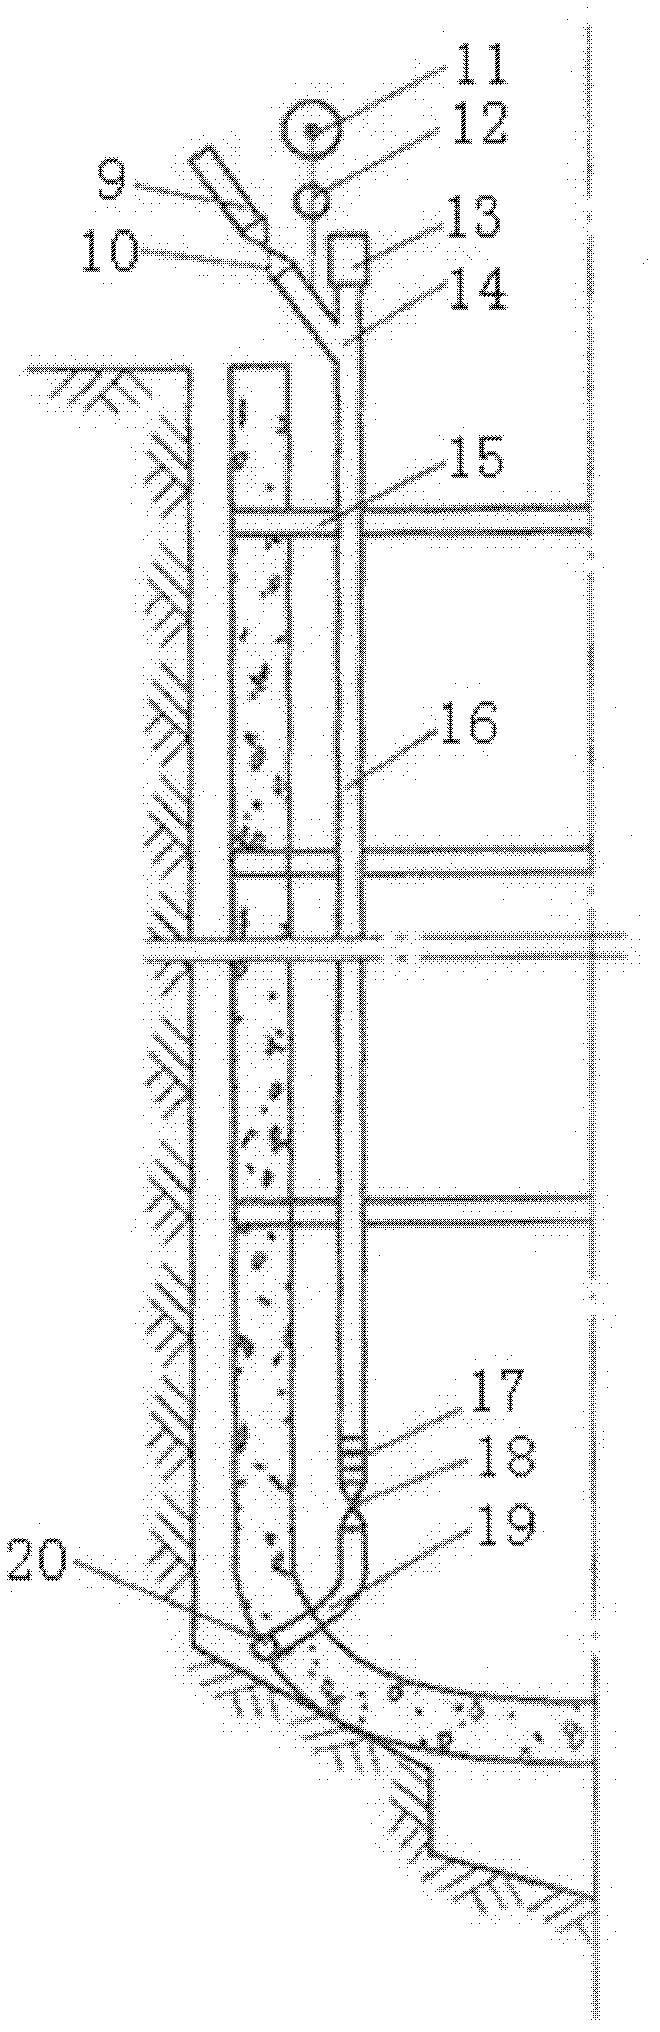 Comprehensive shaft sinking method of positive and raising boring for vertical shaft